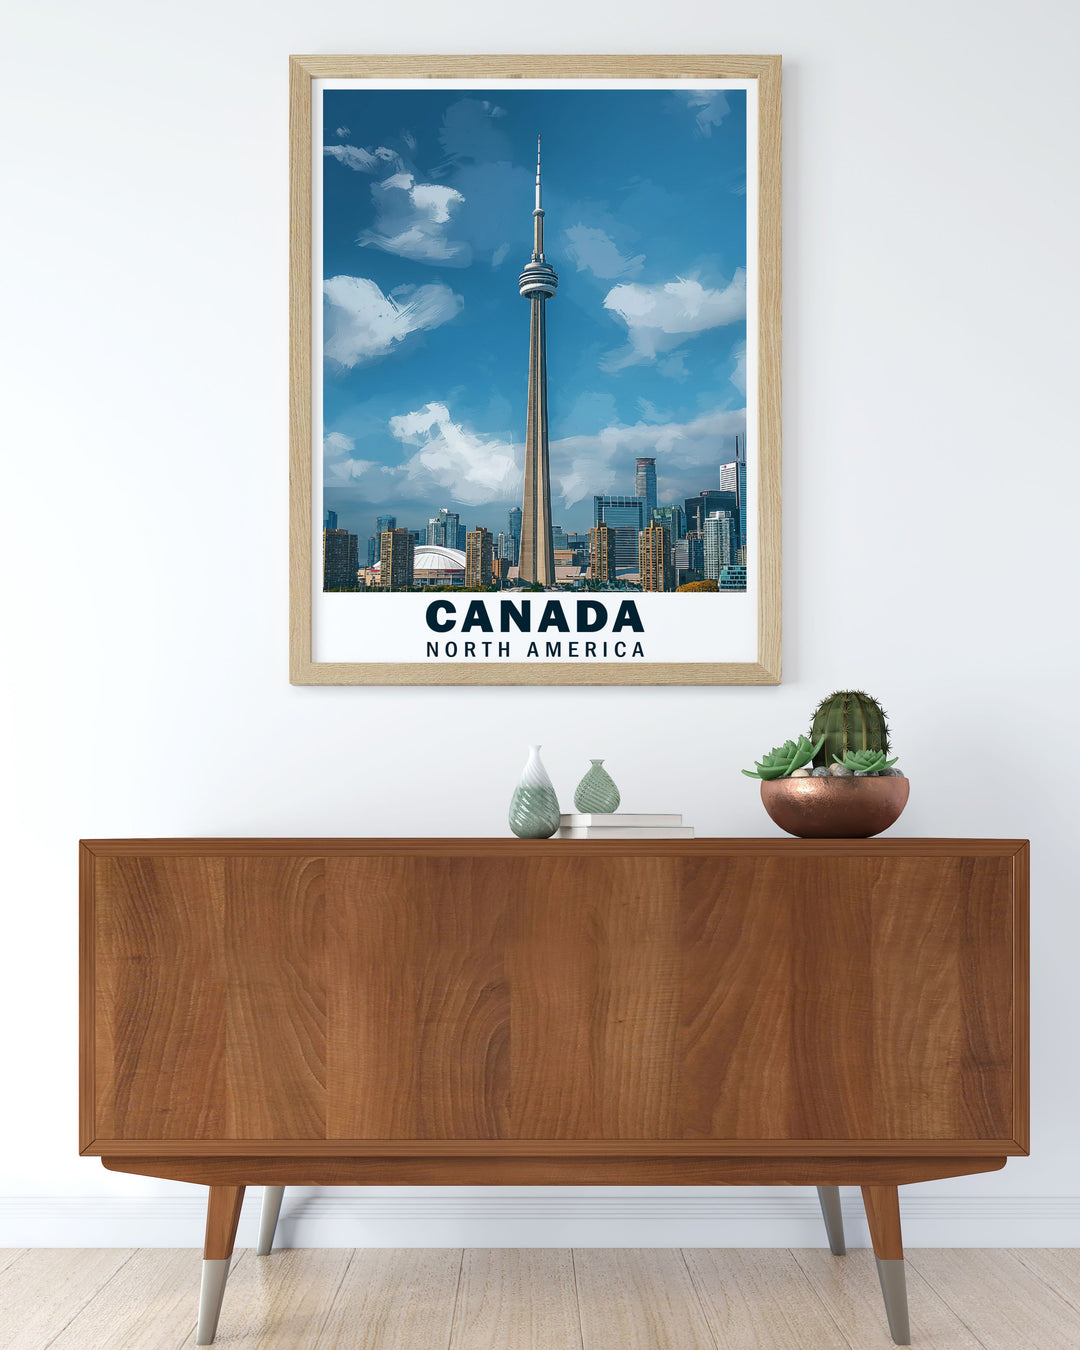 Featuring the sleek design of the CN Tower and Toronto's vibrant skyline, this poster is ideal for those who wish to bring a piece of Canada's architectural beauty into their home.